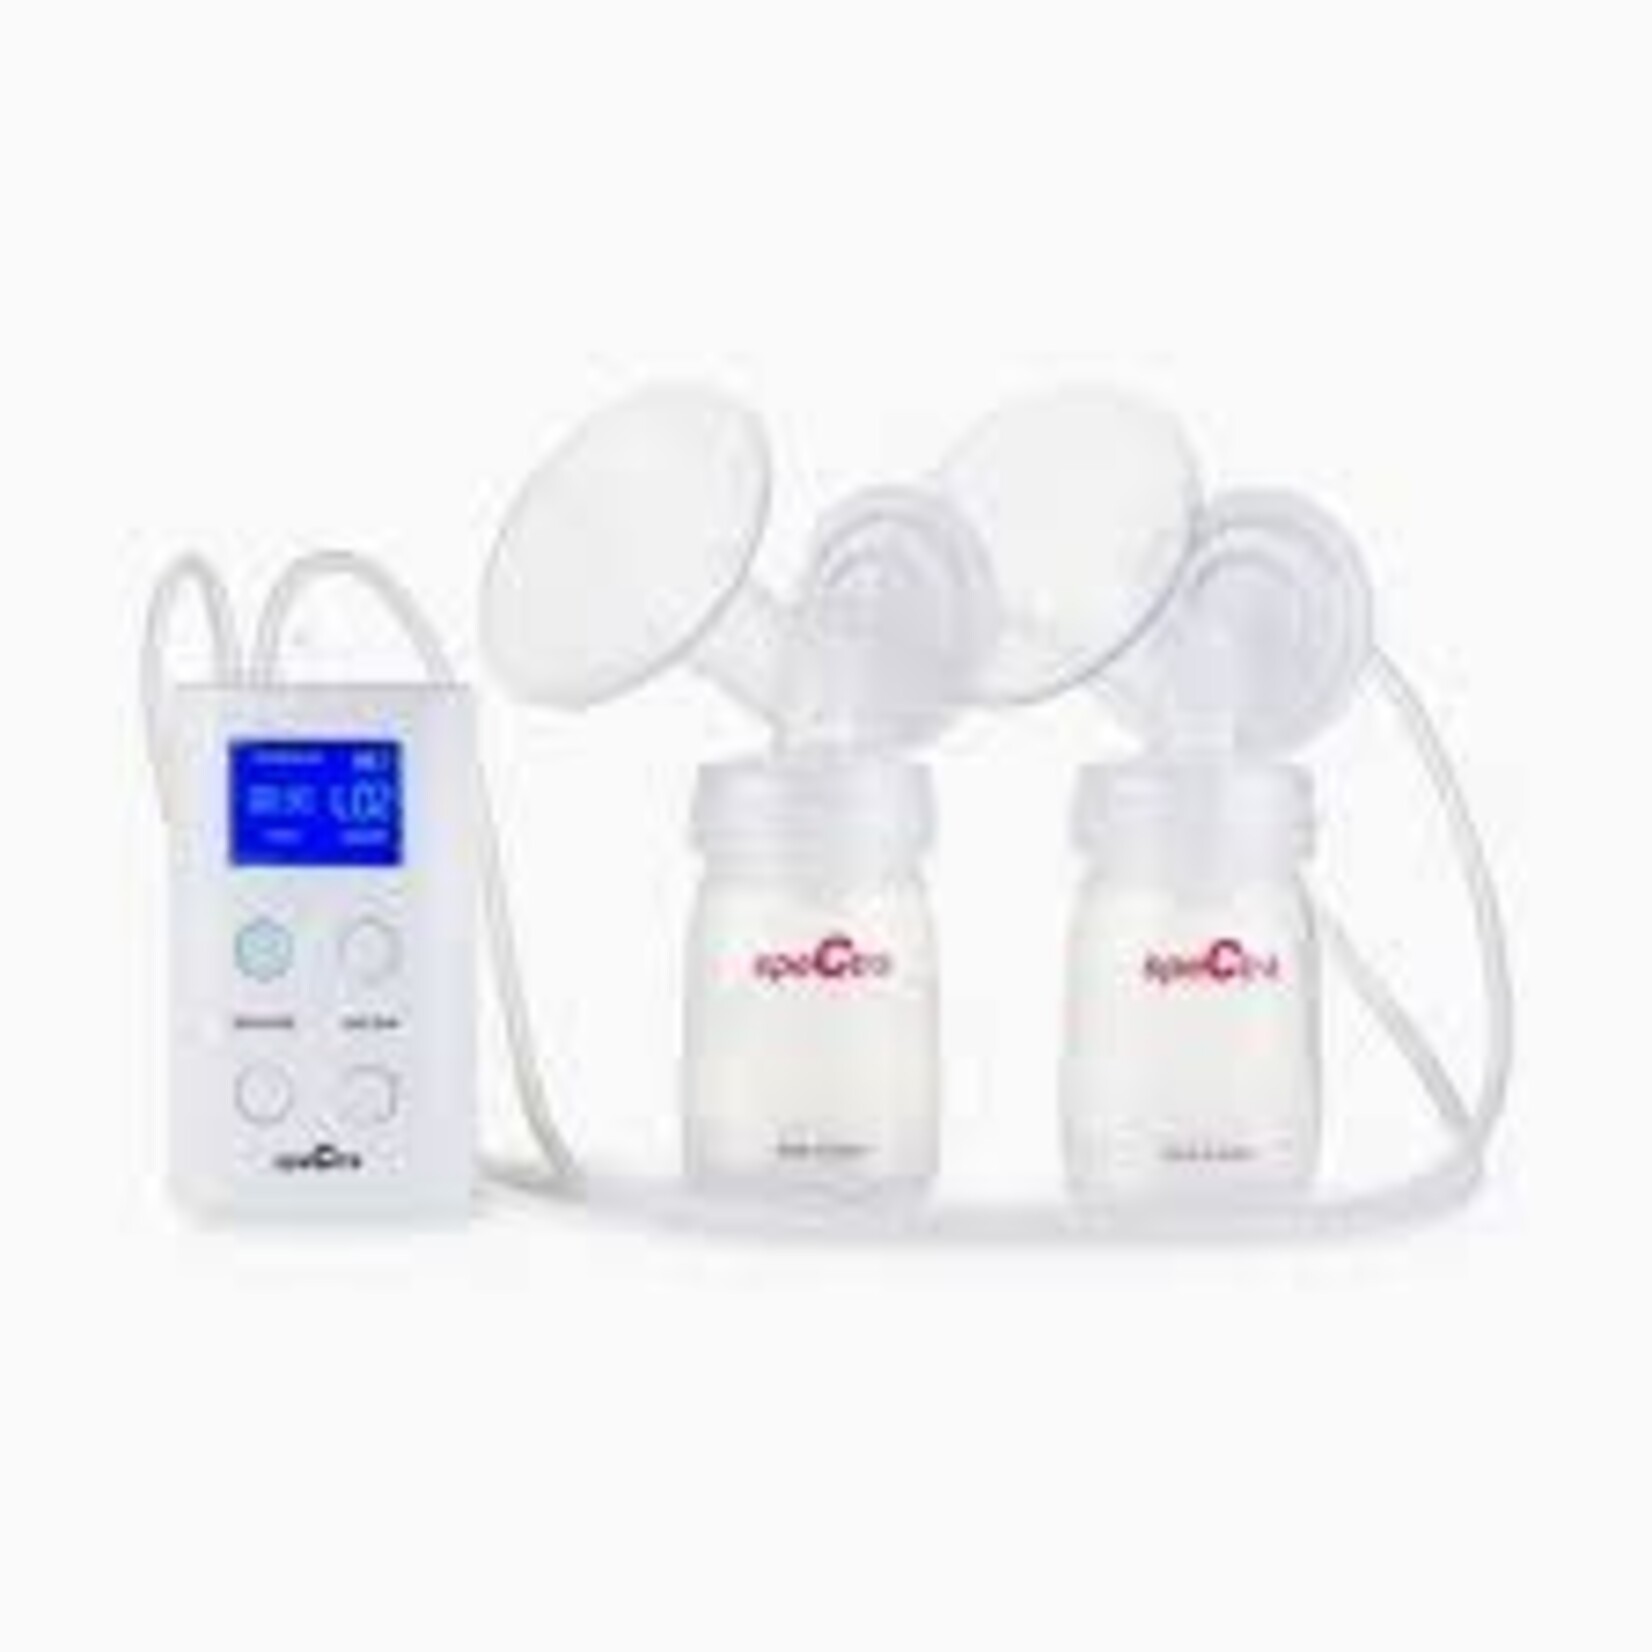 Spectra Image shown for reference purposes only. Actual product appearance may vary. Please read product description for full and accurate details  Select Favorites List  [Select a List...]   Spectra 9 Plus Breast Pump Portable, Rechargeable, Wearable, Milk Coll